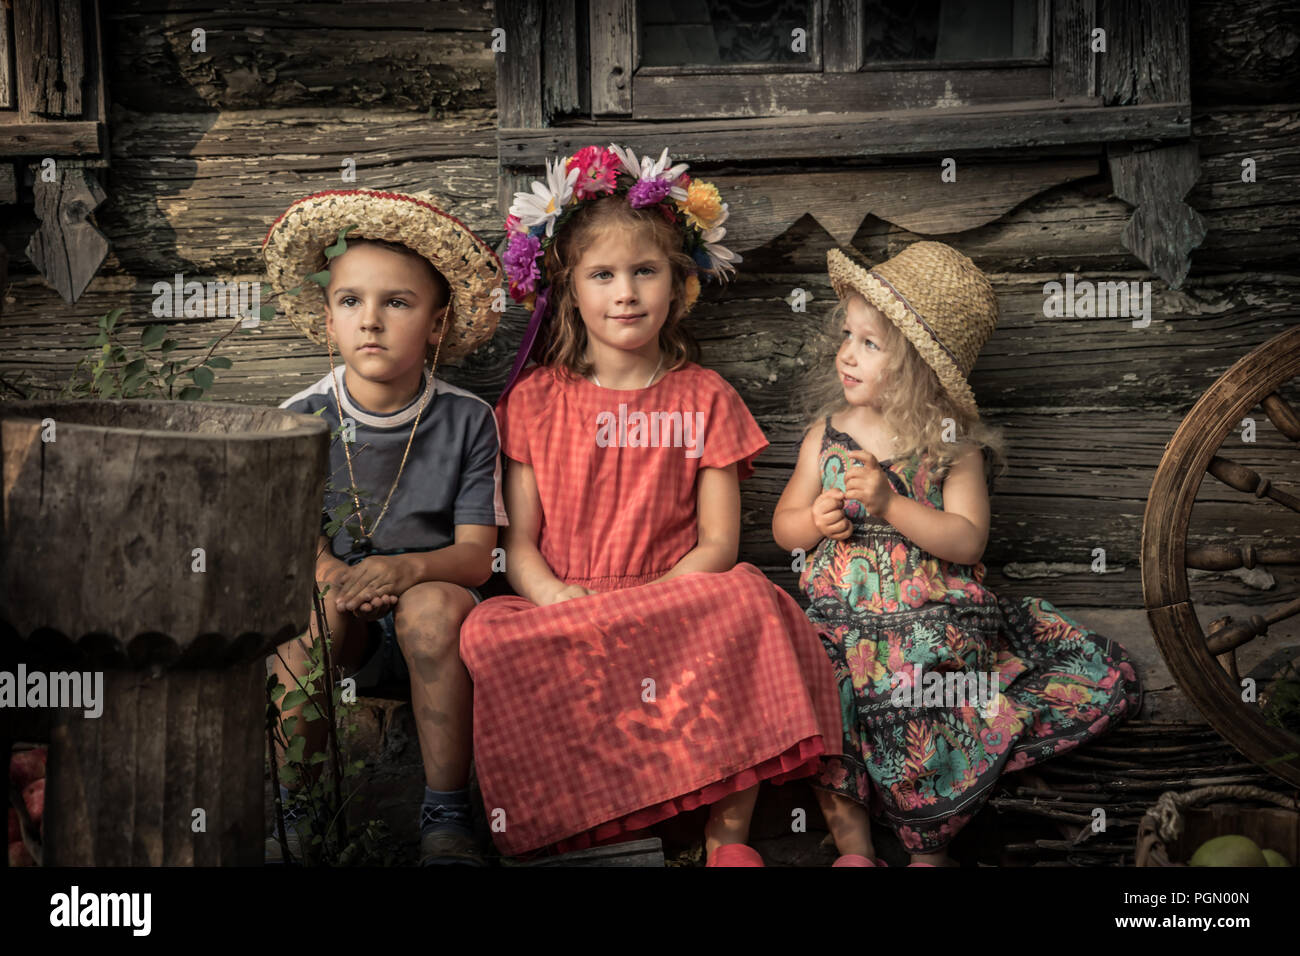 Countryside rustic lifestyle children sitting together old countryside house  symbolizing kids friendship and happy carefree rustic childhood Stock Photo